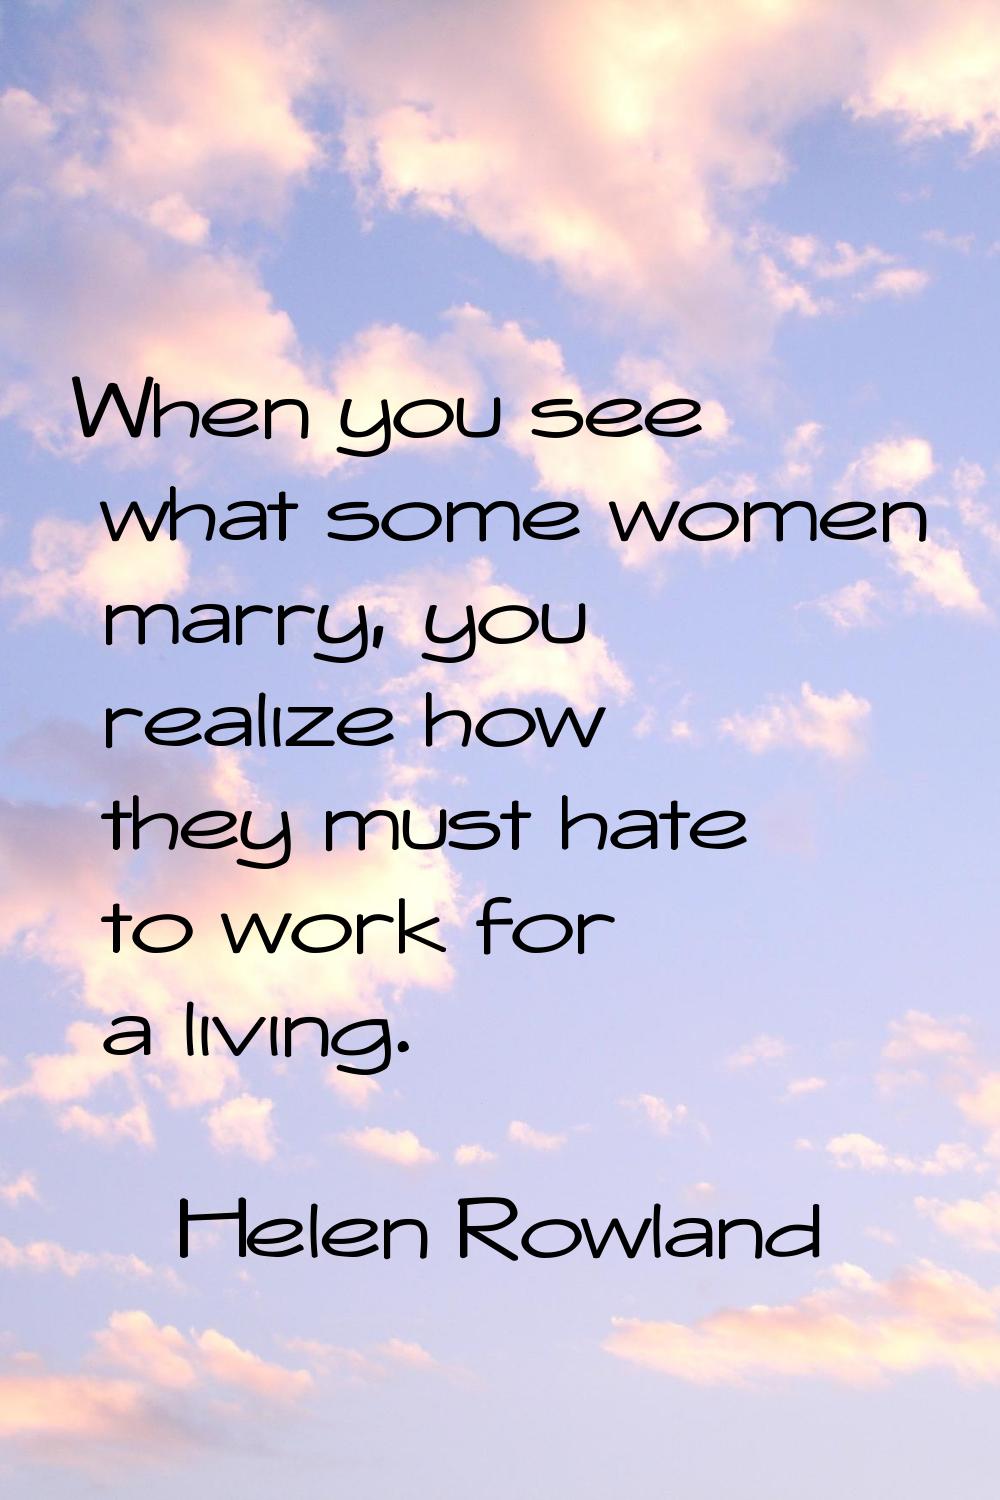 When you see what some women marry, you realize how they must hate to work for a living.